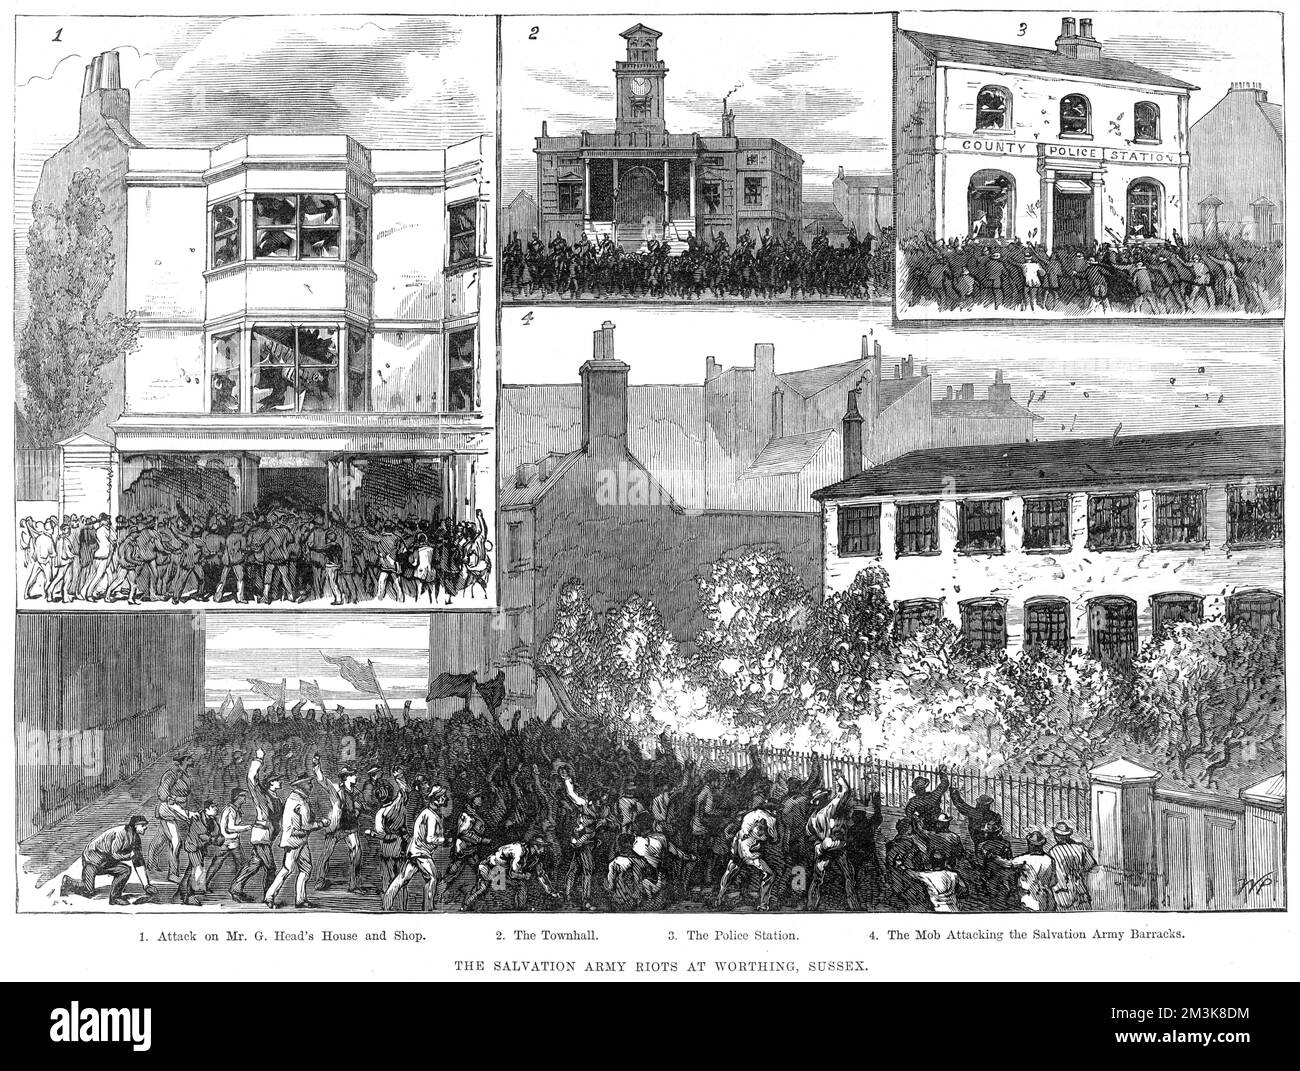 These images show the 'Skeleton Army', opponents of the Salvation Army organised by 'those interested in Sunday drinking', rioting against one of the Salvation Army's religious Sunday processions. The members of the Salvation Army escaped into Montague Hall and hid there for the rest of the day.    1. Attack on Mr. G. Head's house and shop.  2. The Townhall  3. The Police Station  4. The mob attacking the Salvation Army Barracks.     Date: 1884 Stock Photo